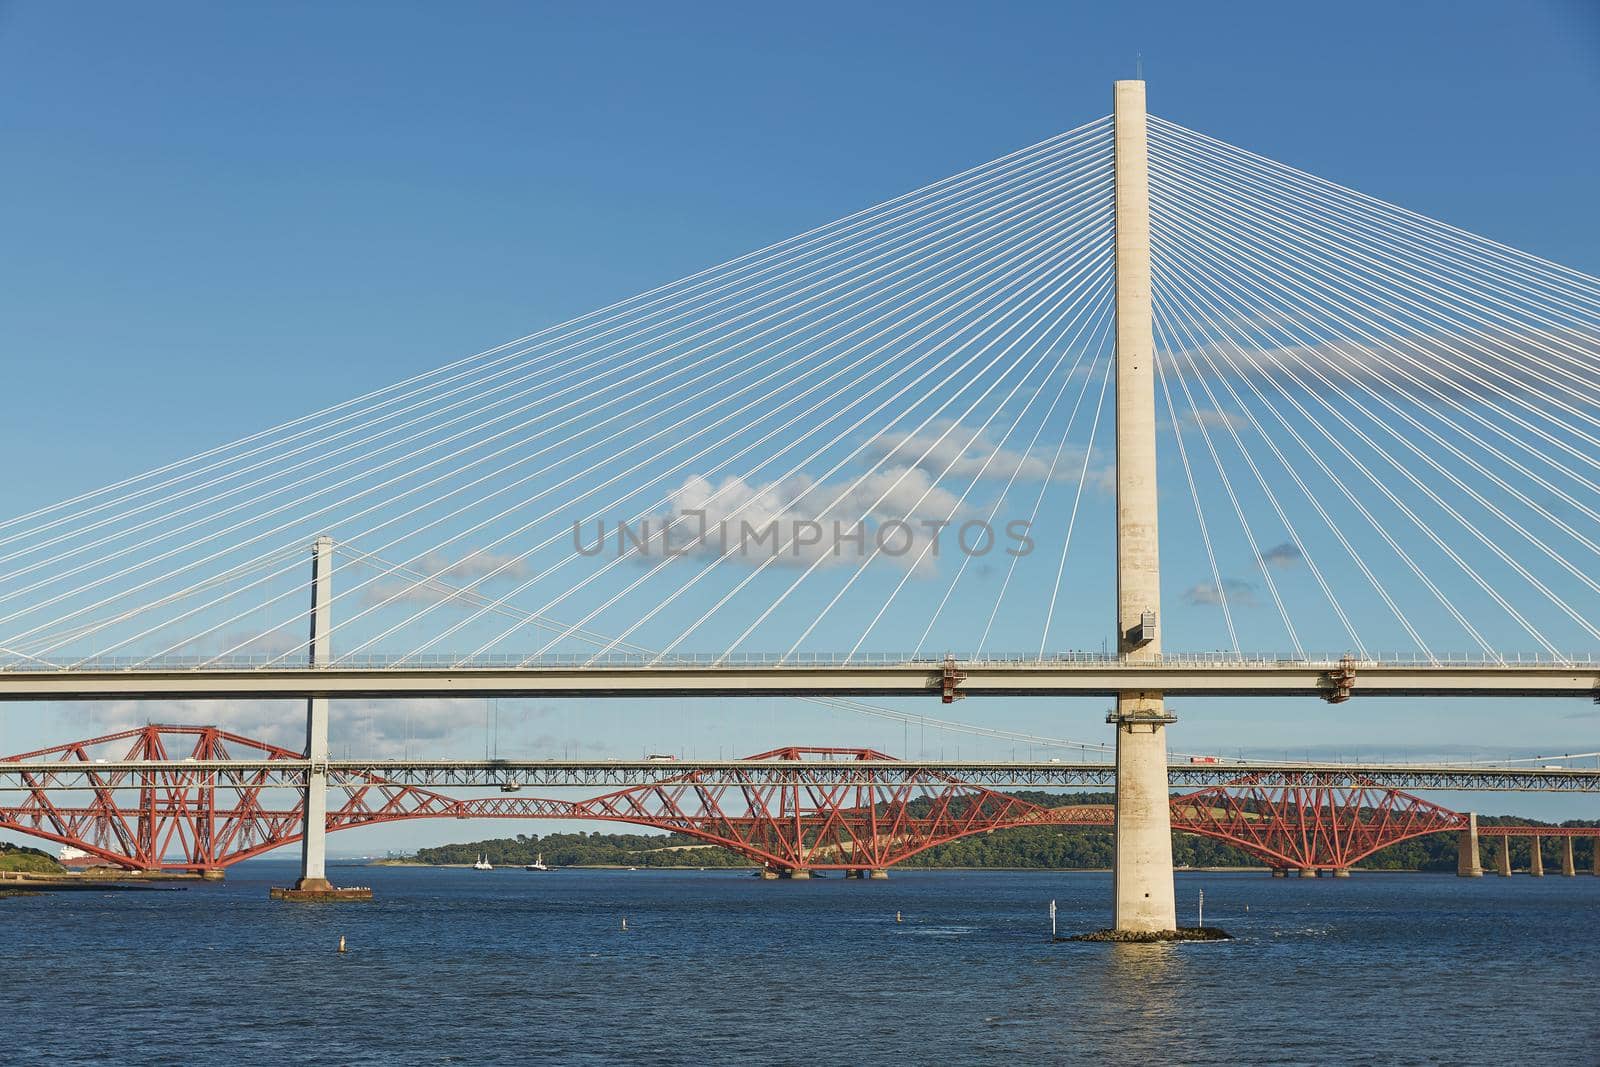 The new Queensferry Crossing bridge over the Firth of Forth with the older Forth Road bridge and the iconic Forth Rail Bridge in Edinburgh Scotland. by wondry